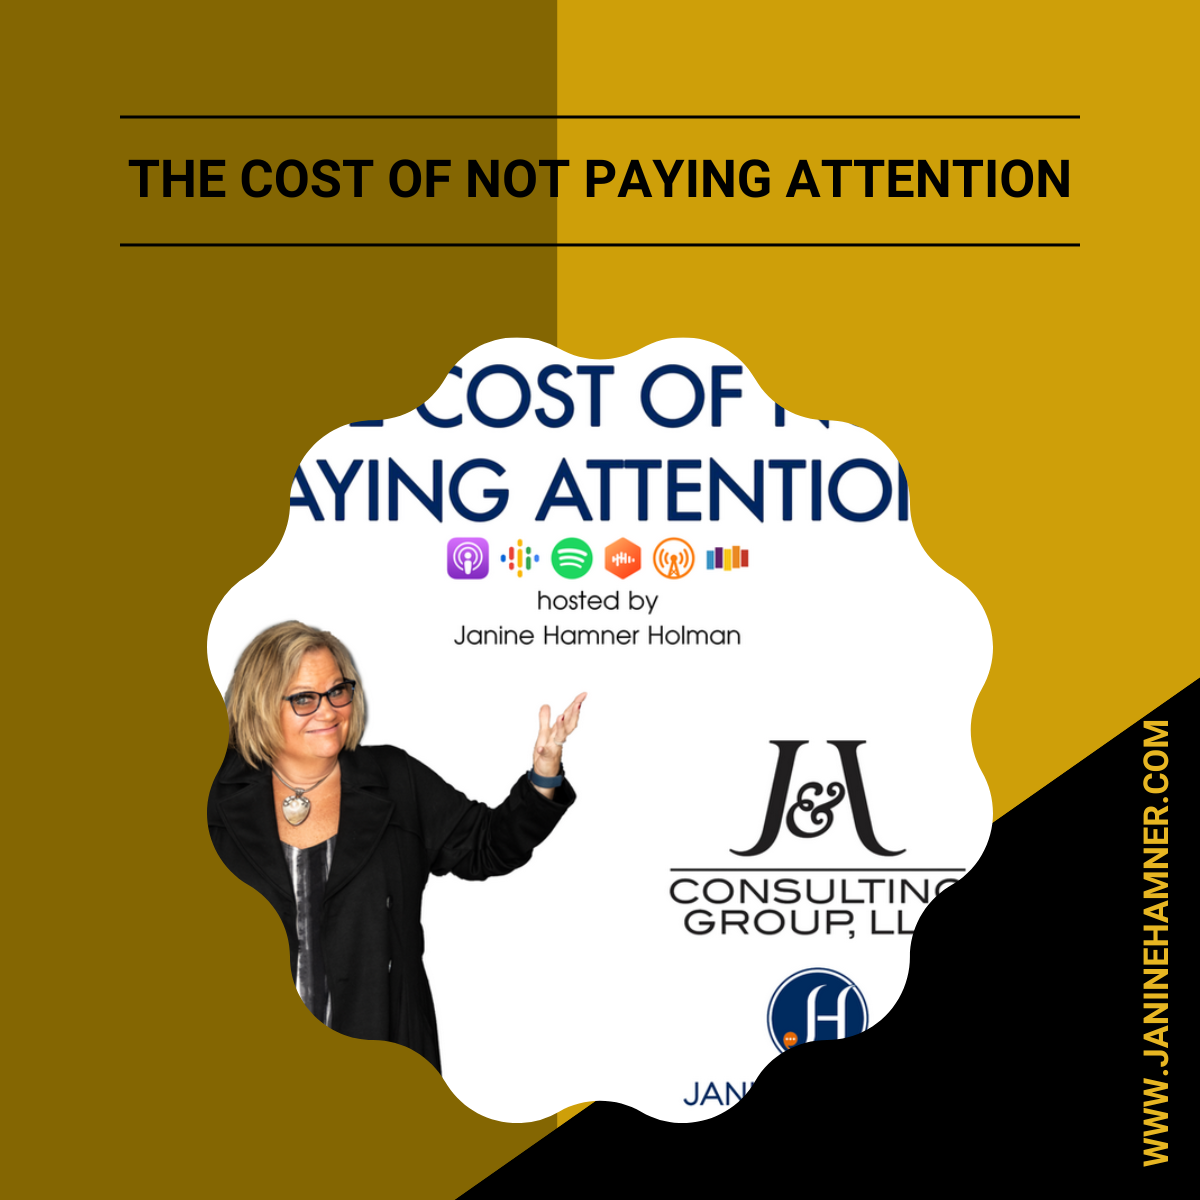 The Cost of Not Paying Attention